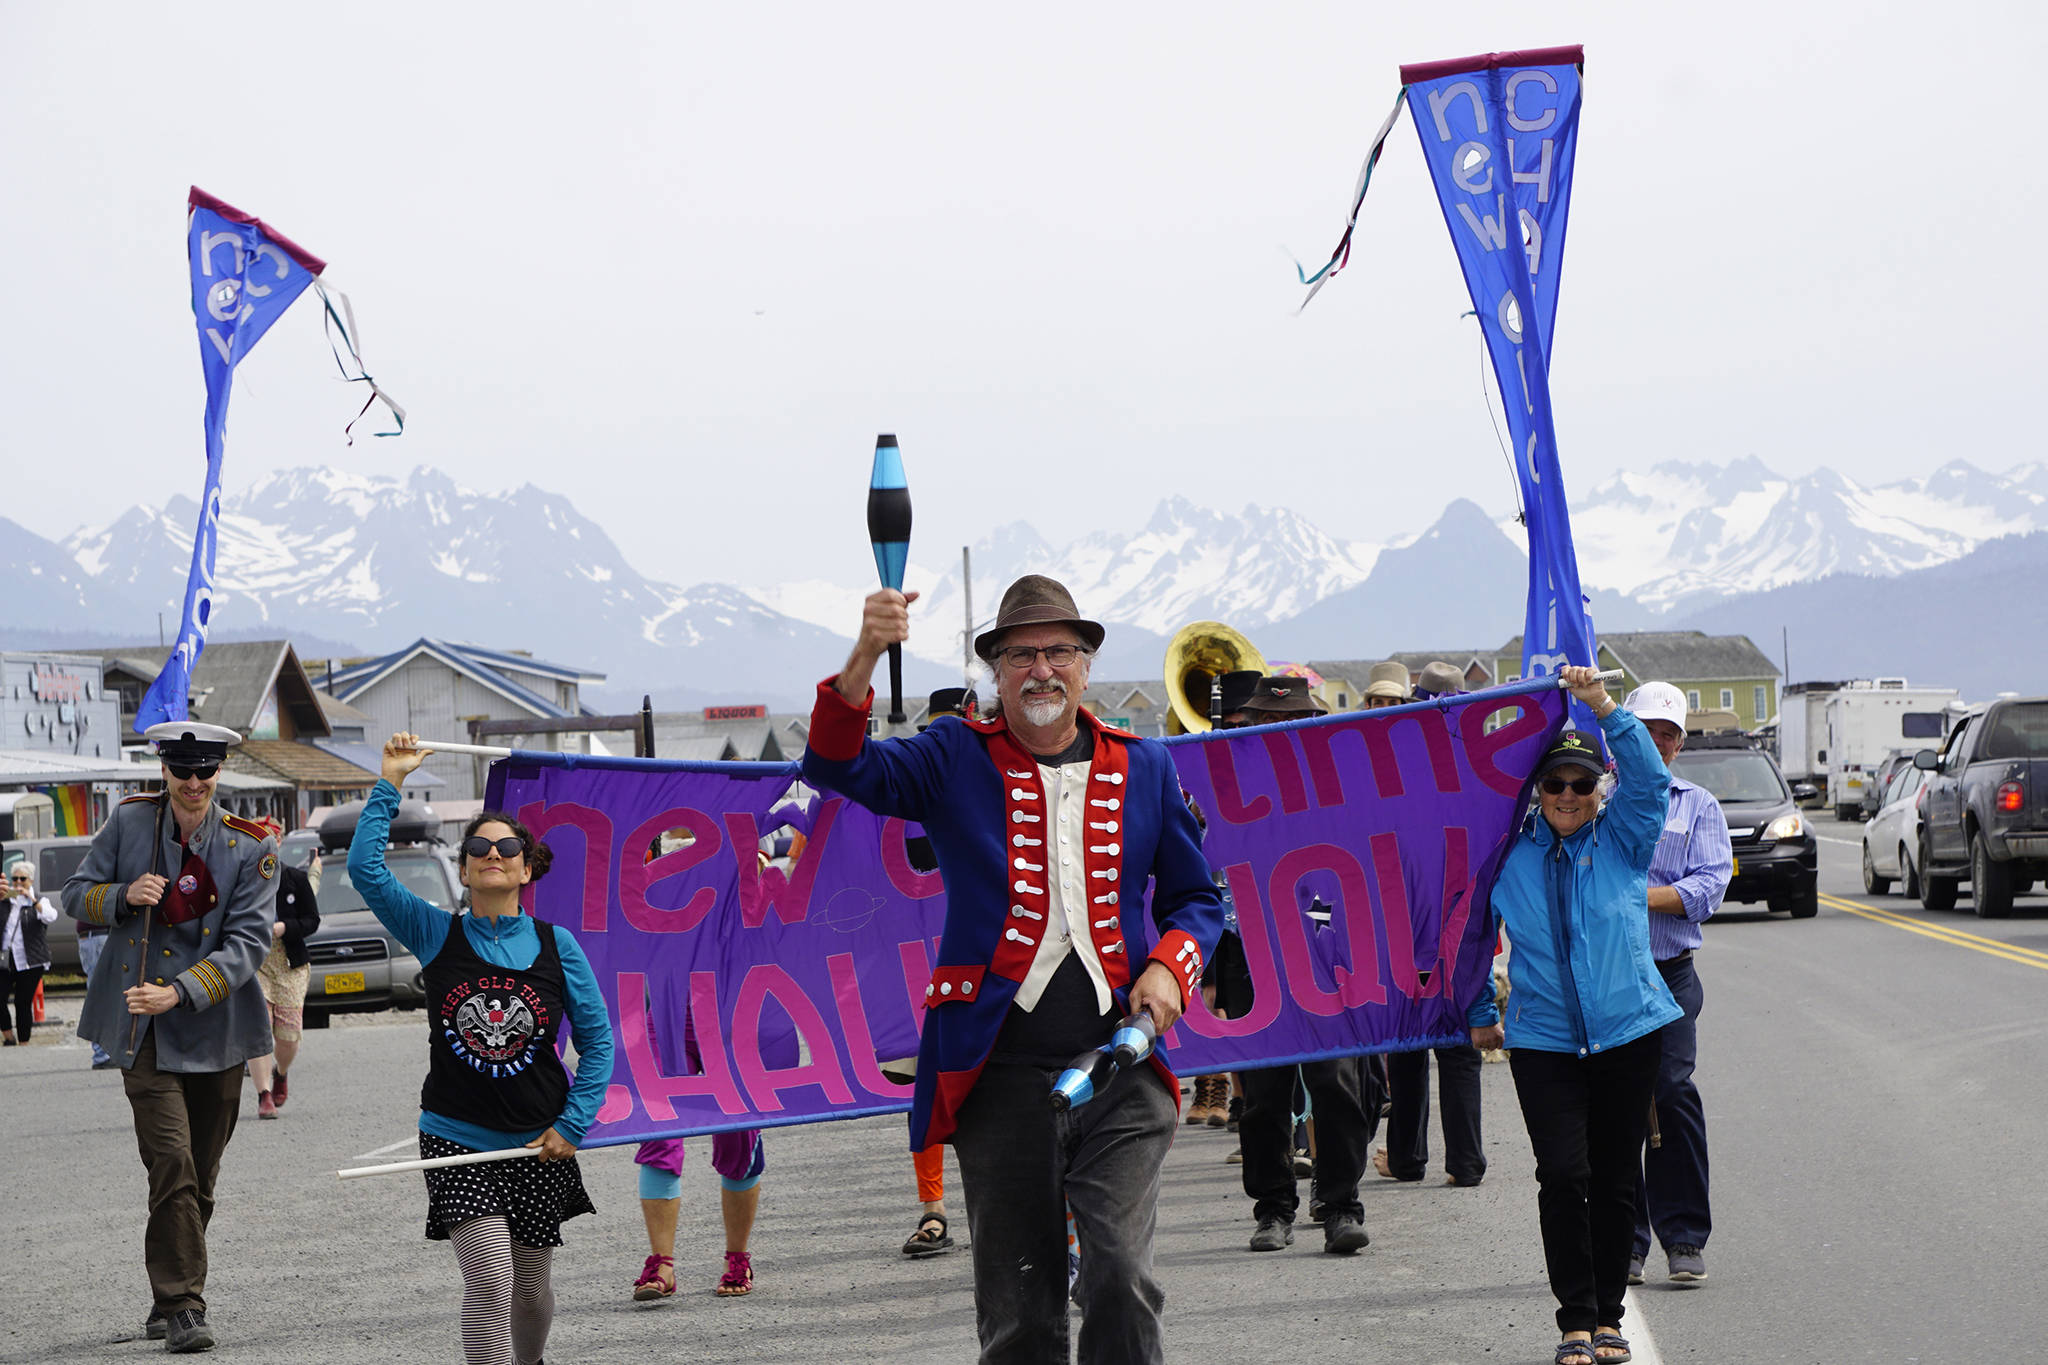 The New Old Time Chautauqua Fighting Instruments of Karma Marching Chamber Band Orchestra marches on the Homer Spit on July 2, 2019, in Homer, Alaska. The group visited Homer as part of a week-long tour partially funded by the Rasmuson Foundation’s Harper Arts Touring Fund, administed by the Alaska State Council on the Arts — an example of state-foundation cooperation in arts funding. (Photo by Michael Armstrong/Homer News)